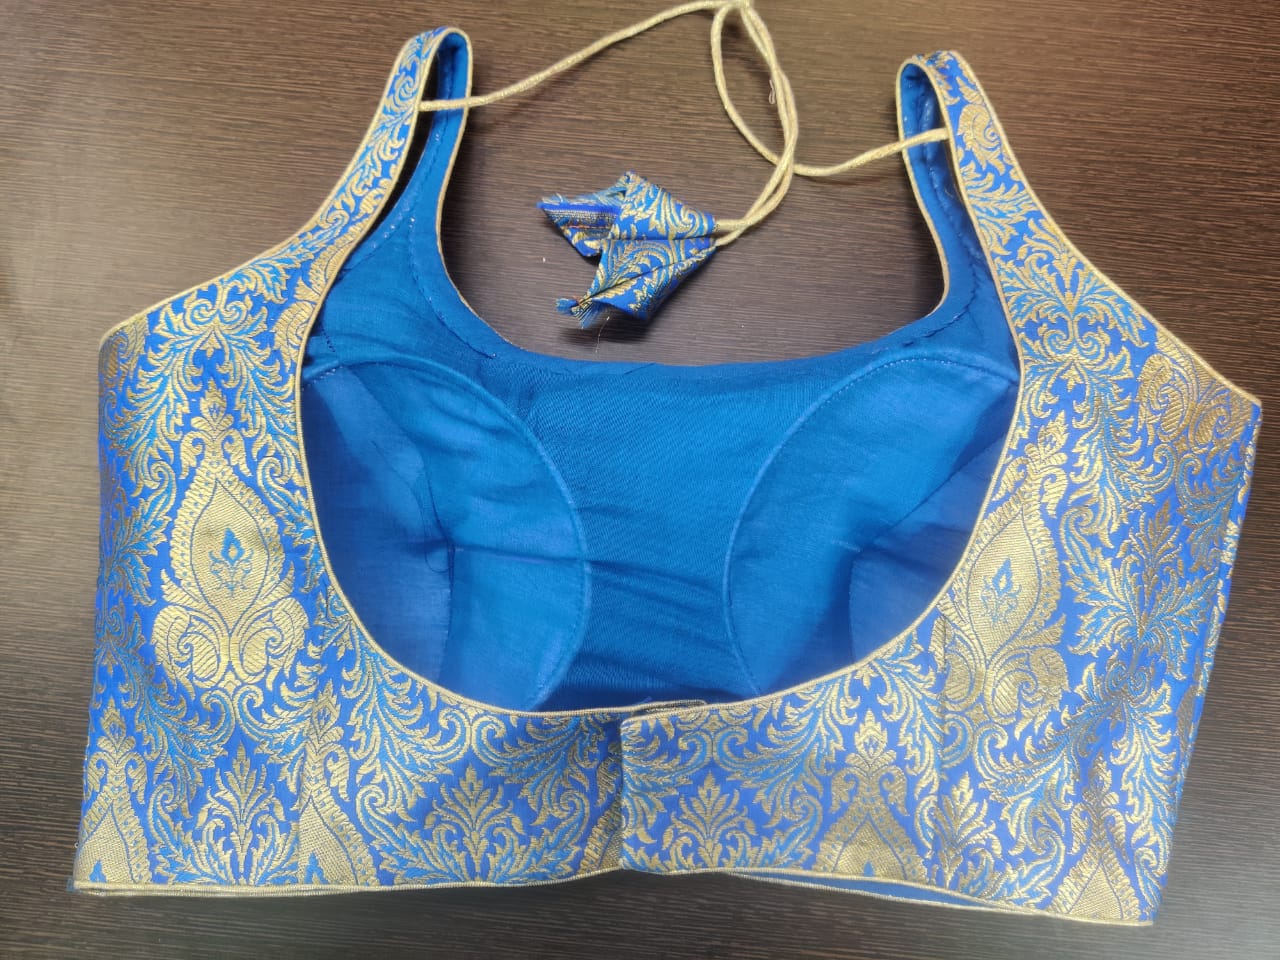 Buy blue sleeveless readymade Banarasi saree blouse online in USA. Elevate your Indian saree style with exquisite readymade sari blouse, embroidered saree blouses, Banarasi sari blouse, designer saree blouse from Pure Elegance Indian clothing store in USA.-back